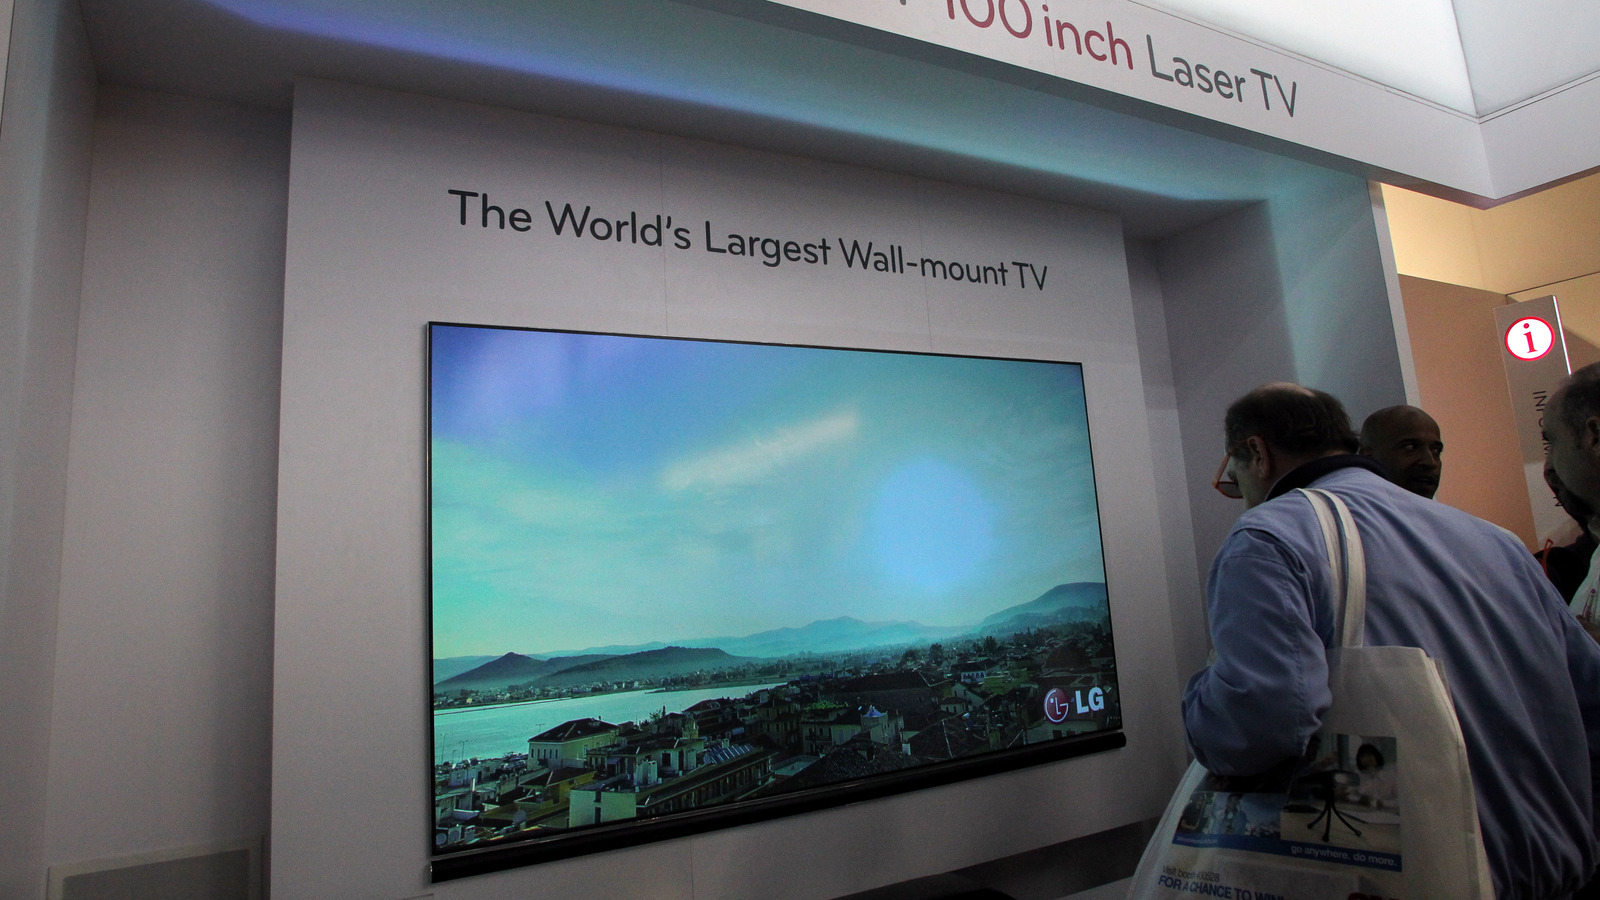 Pros & Cons: Do You Really Need A 100-Inch TV?